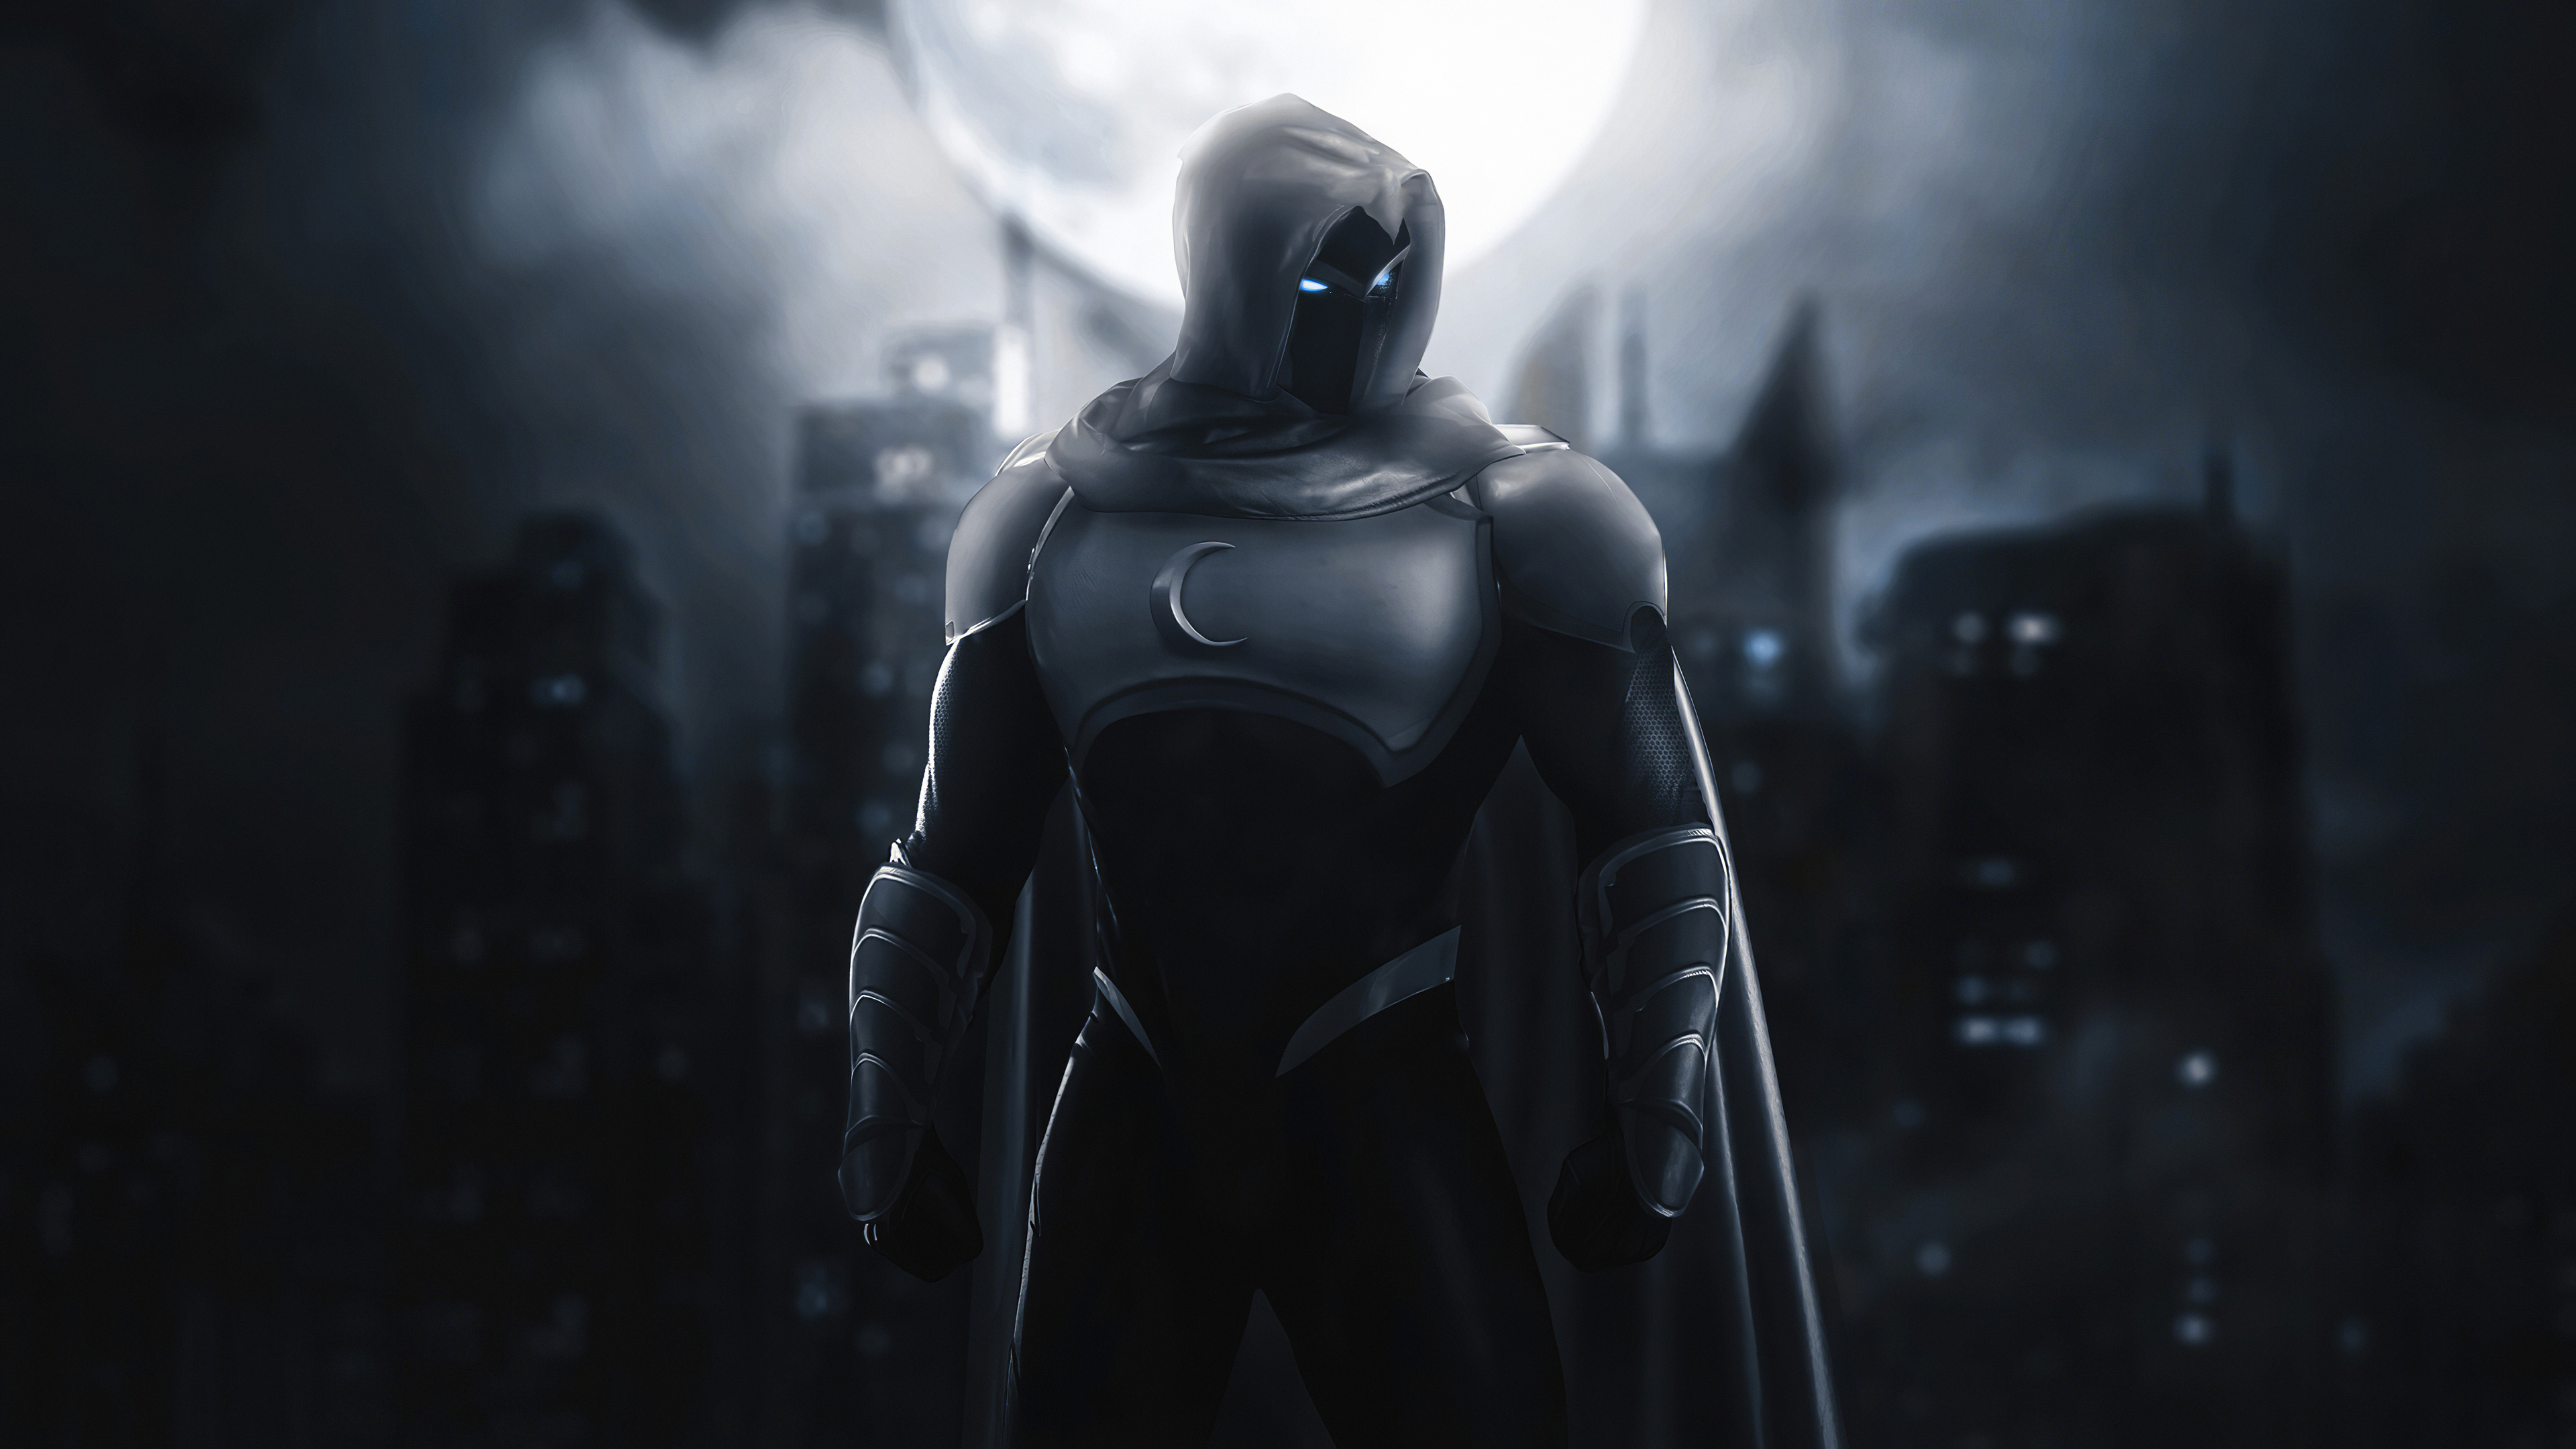 Moon Knight 4k 2020, HD Superheroes, 4k Wallpapers, Image, Backgrounds, Photos and Pictures